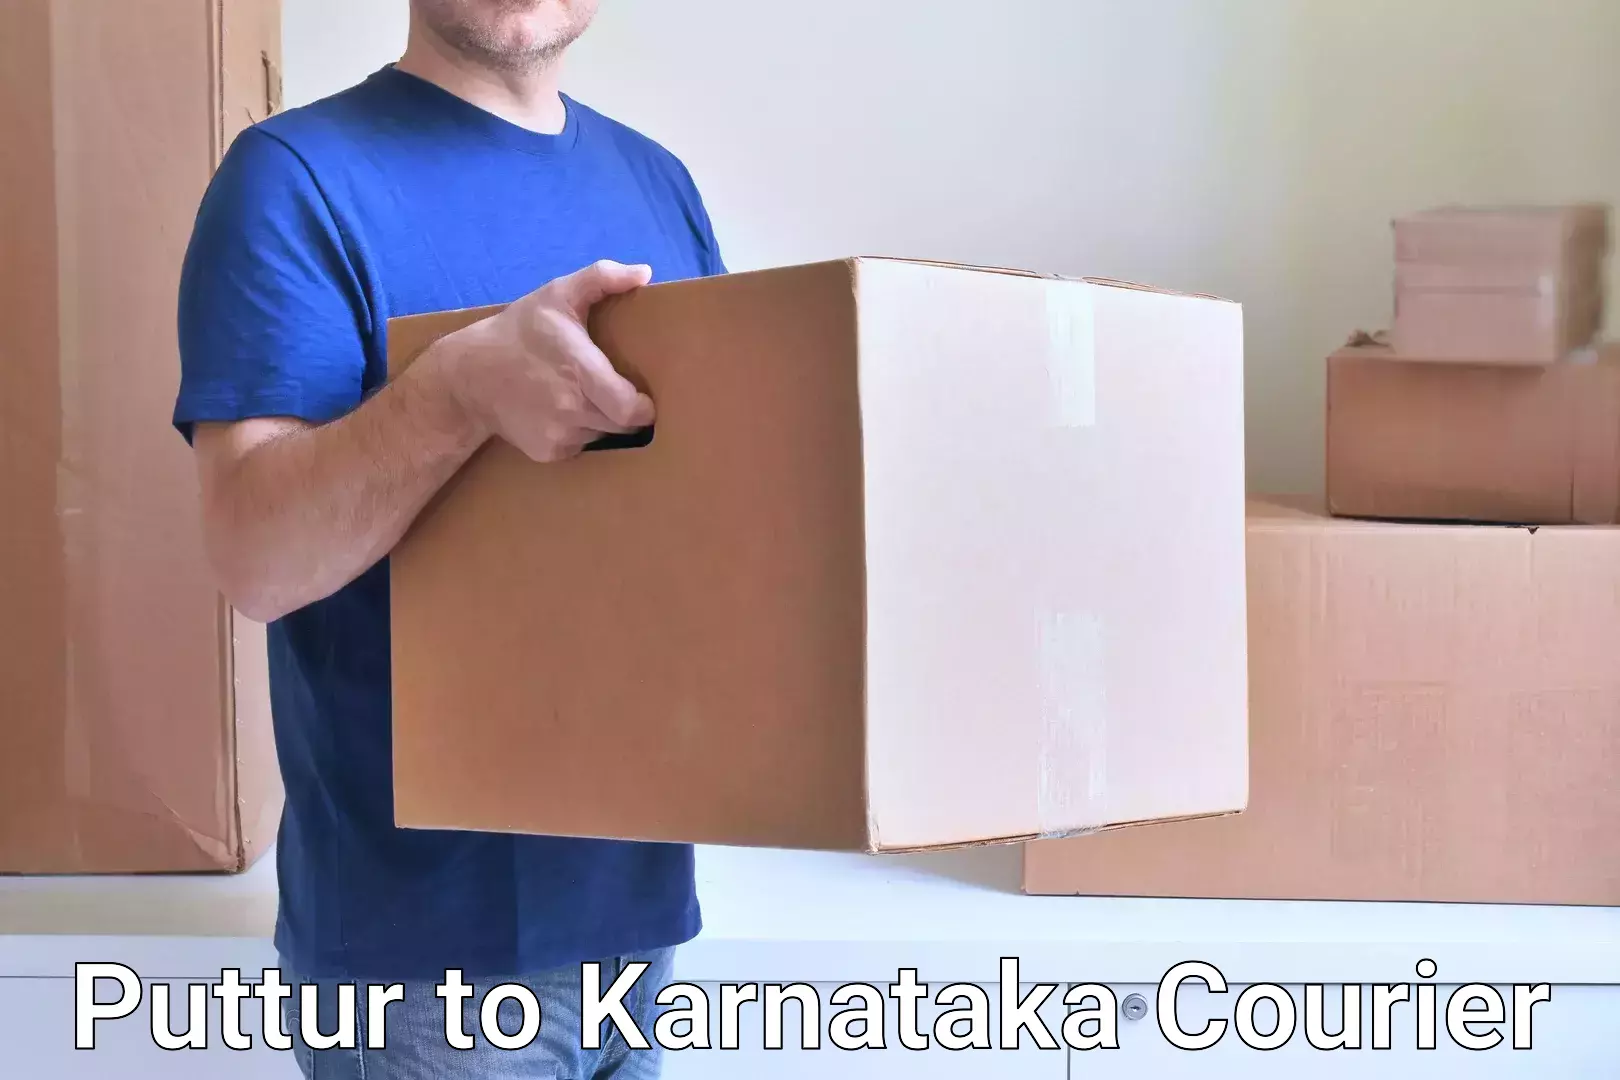 State-of-the-art courier technology Puttur to Chikkamagalur